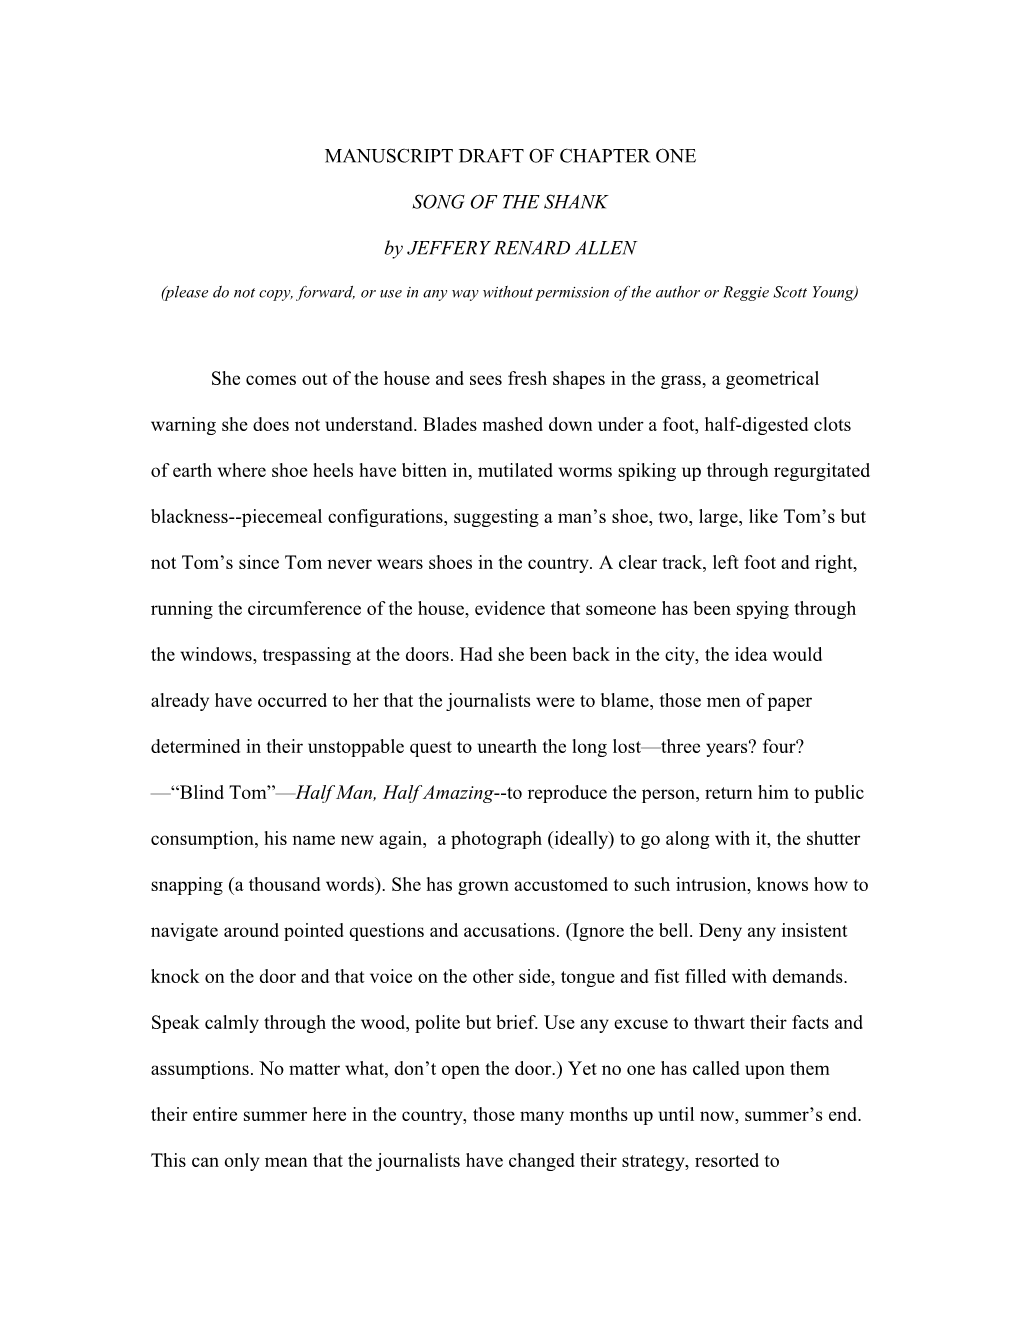 Manuscript Draft of Chapter One